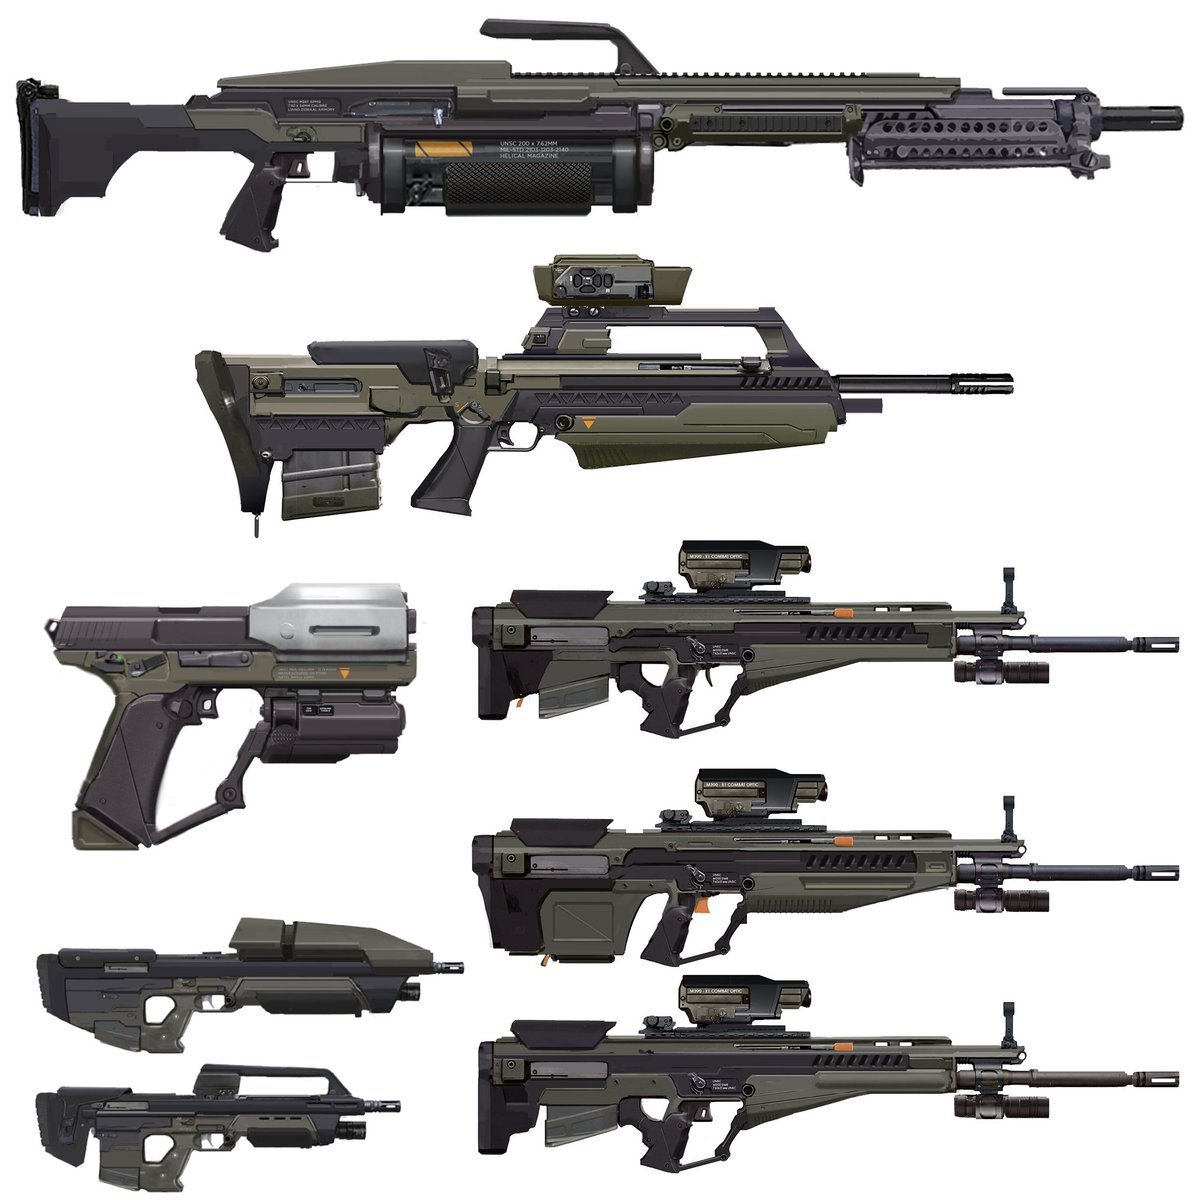 Halo Guns Remixed - Series The whole family I ended up designing, all start...